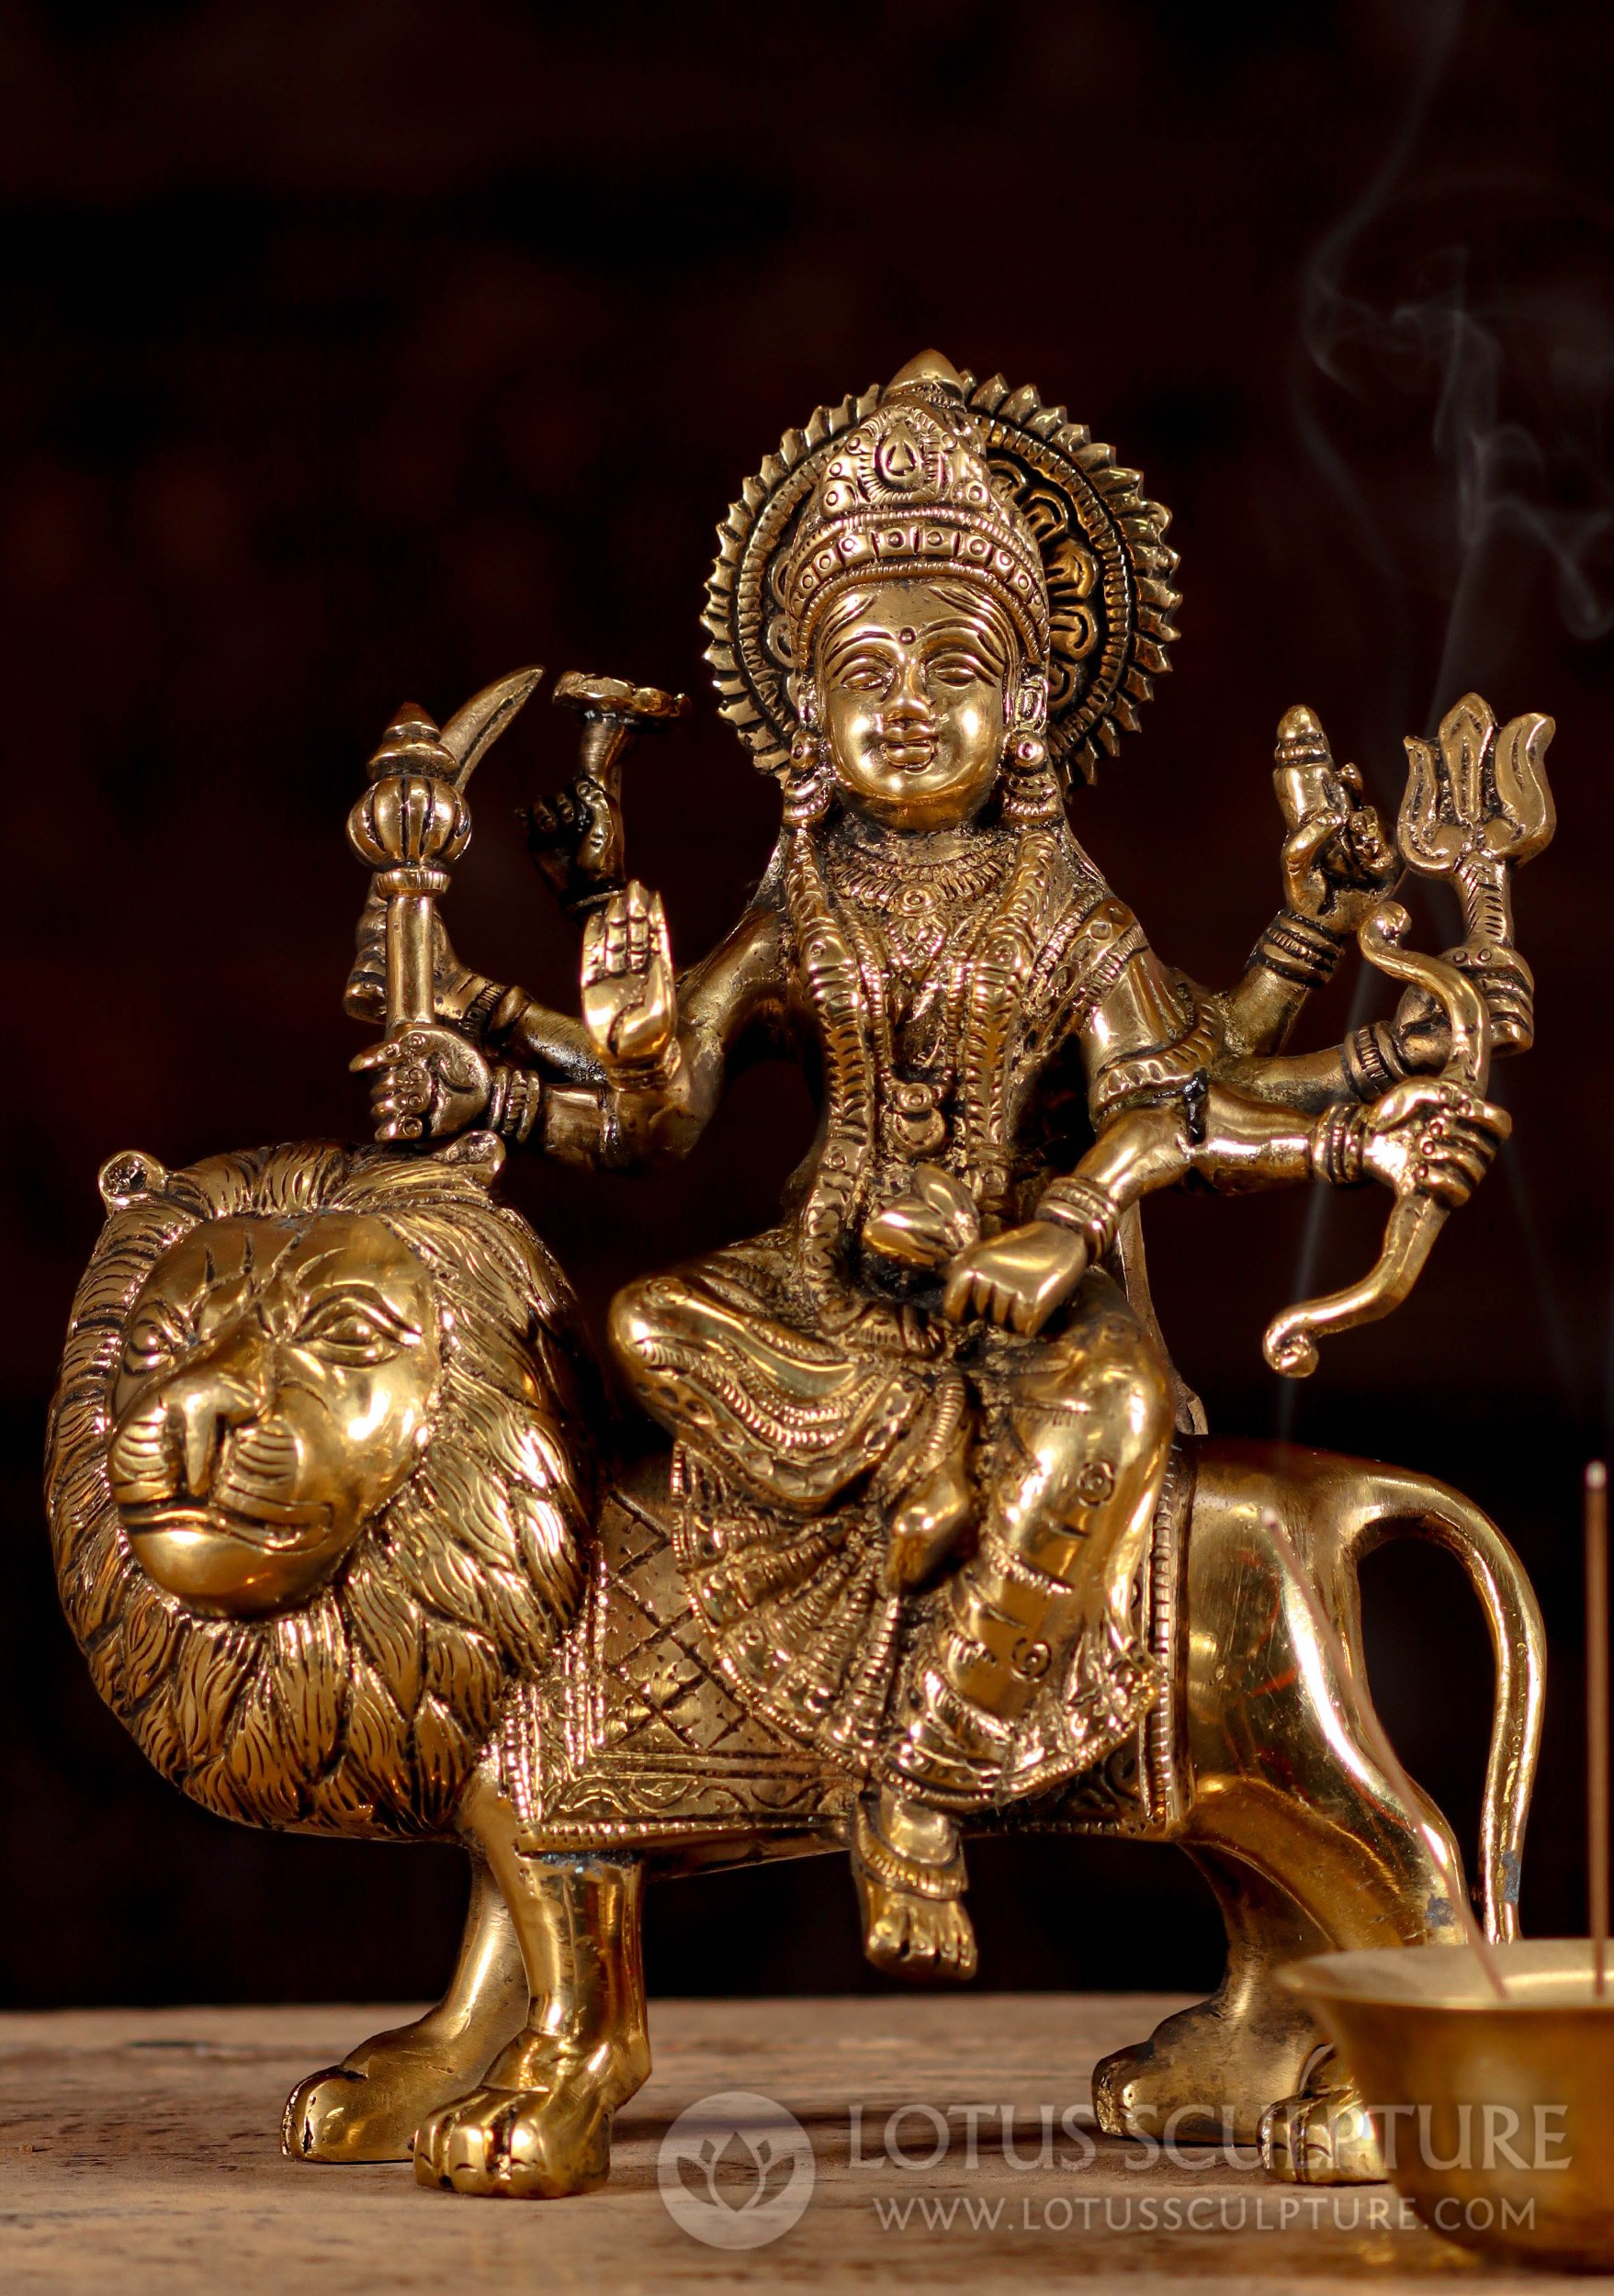 Hindu Goddess Brass Durga Statue Seated on Her Vahana, a Lion with 8 Arms  Holding Weapons 9 (#160bs46a): Hindu Gods & Buddha Statues